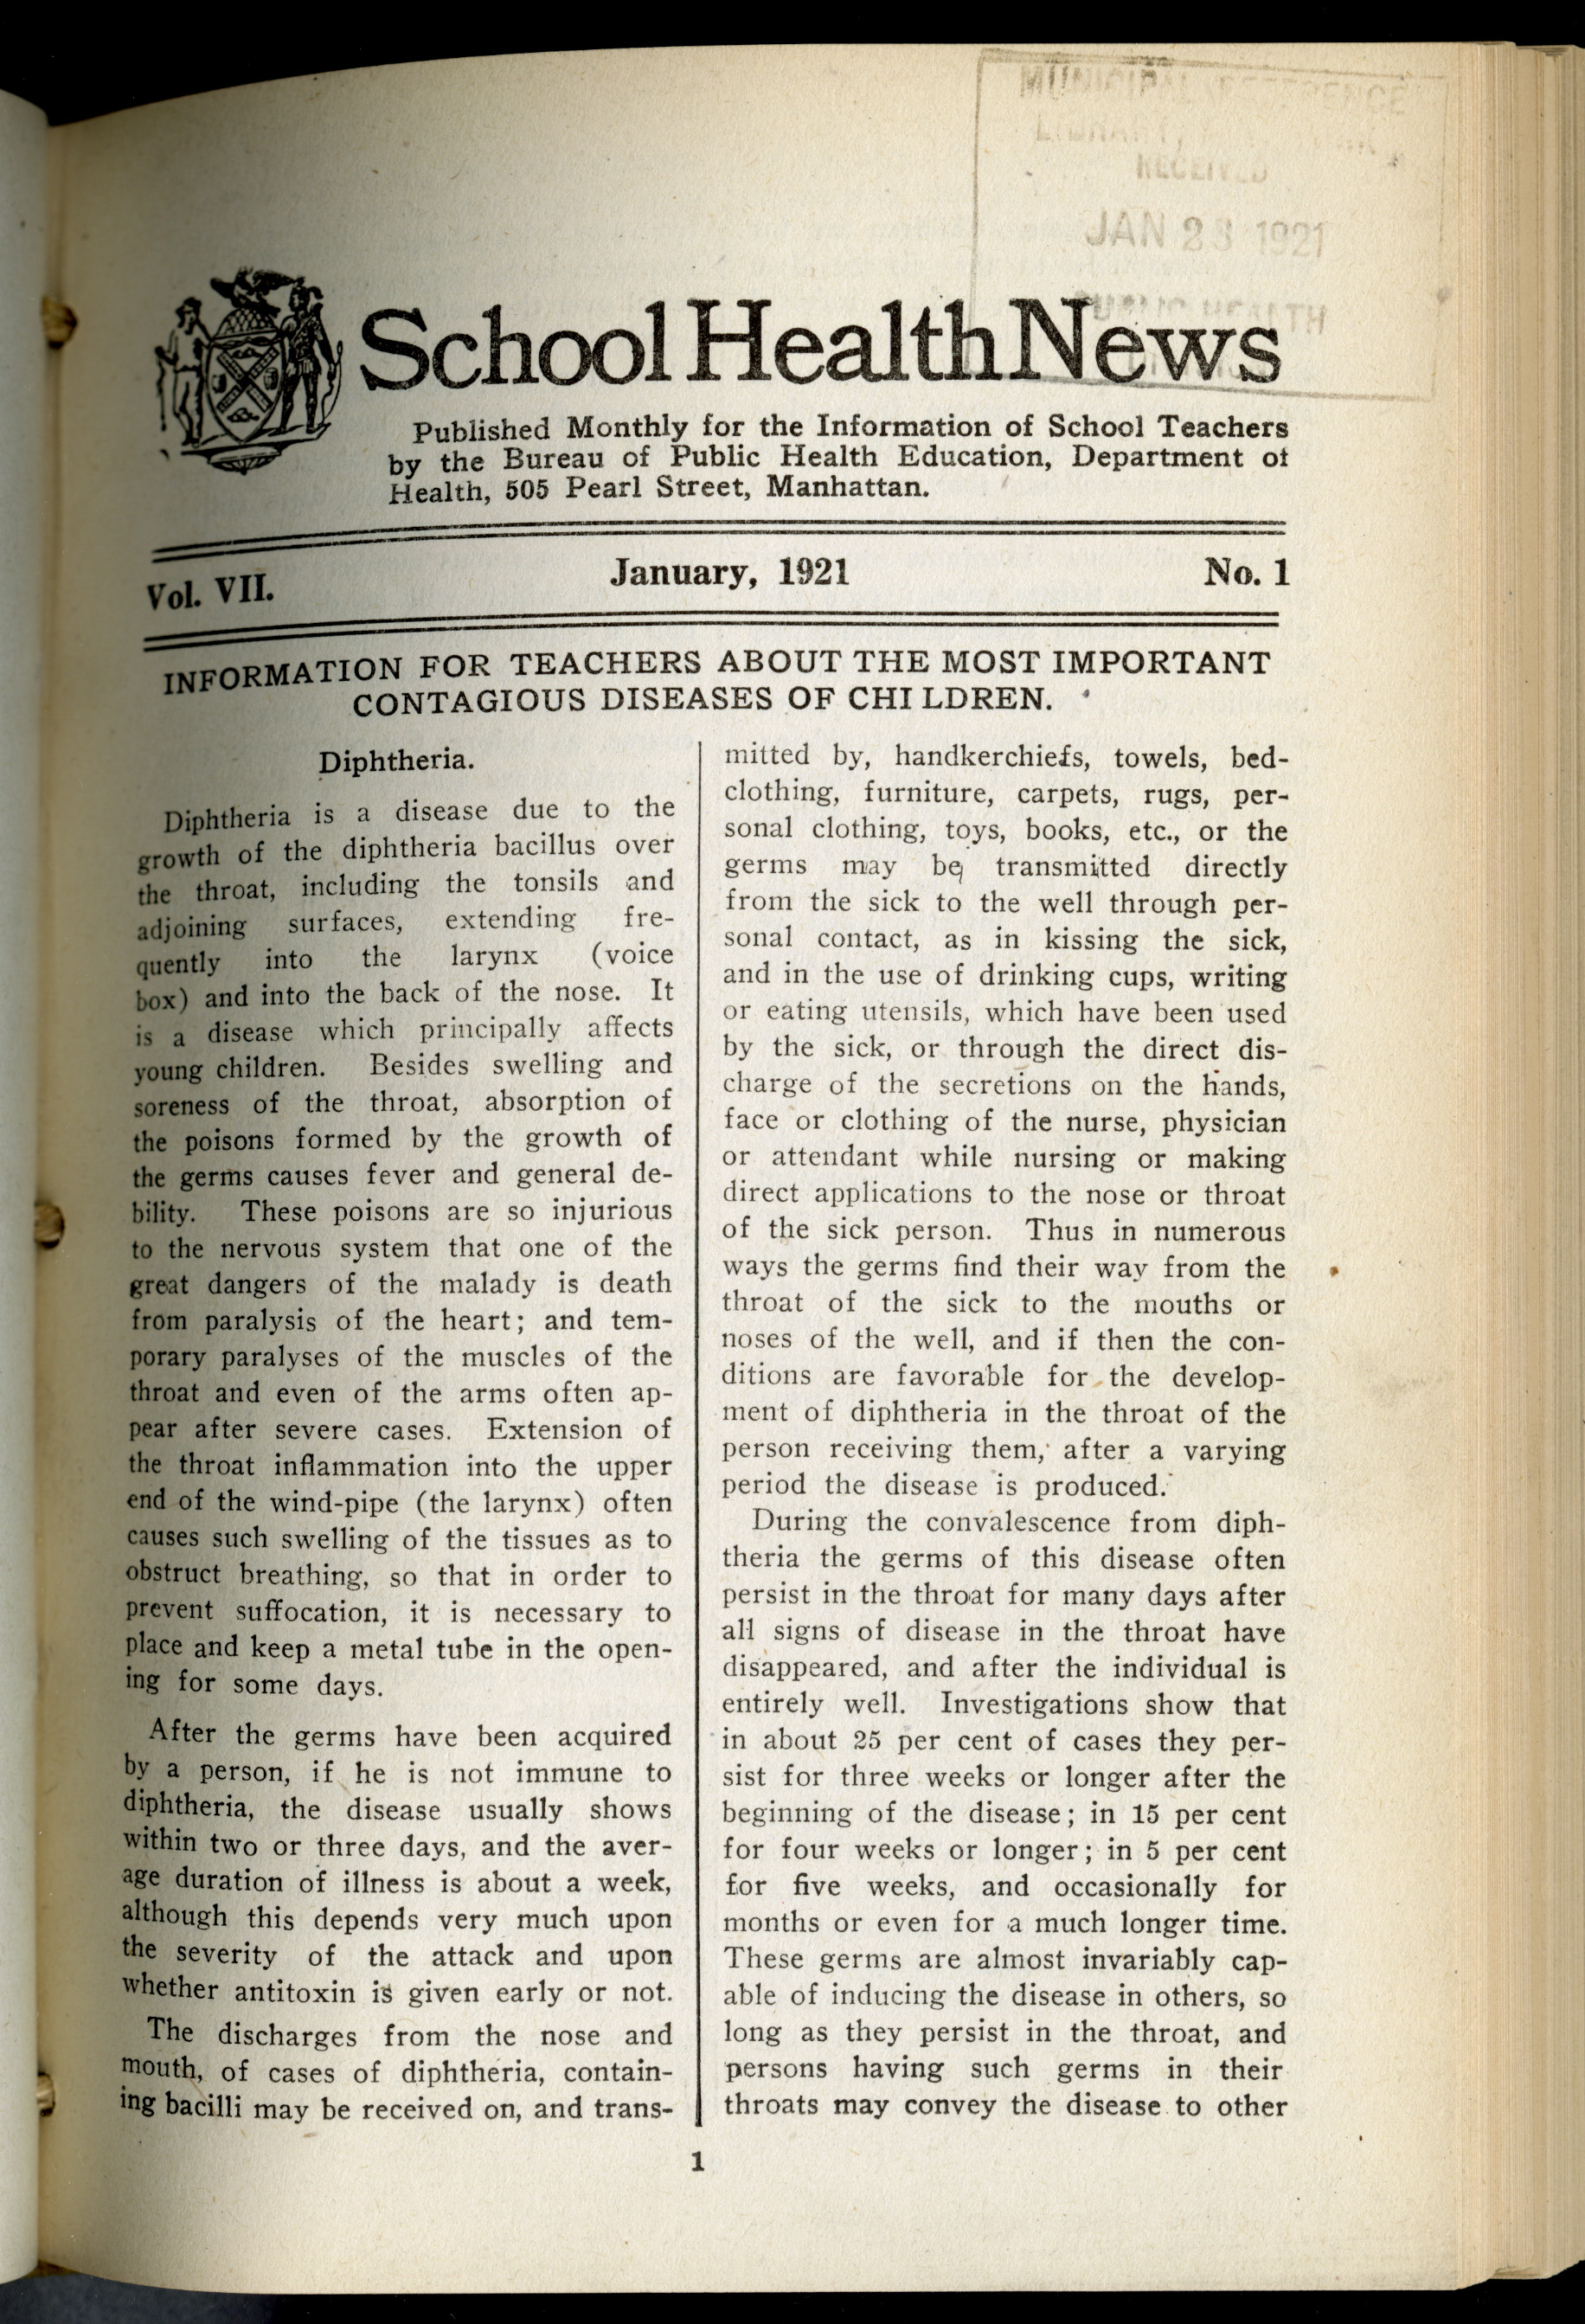 1921 article in School Health News about diphtheria, one of the most important contagious diseases for children.